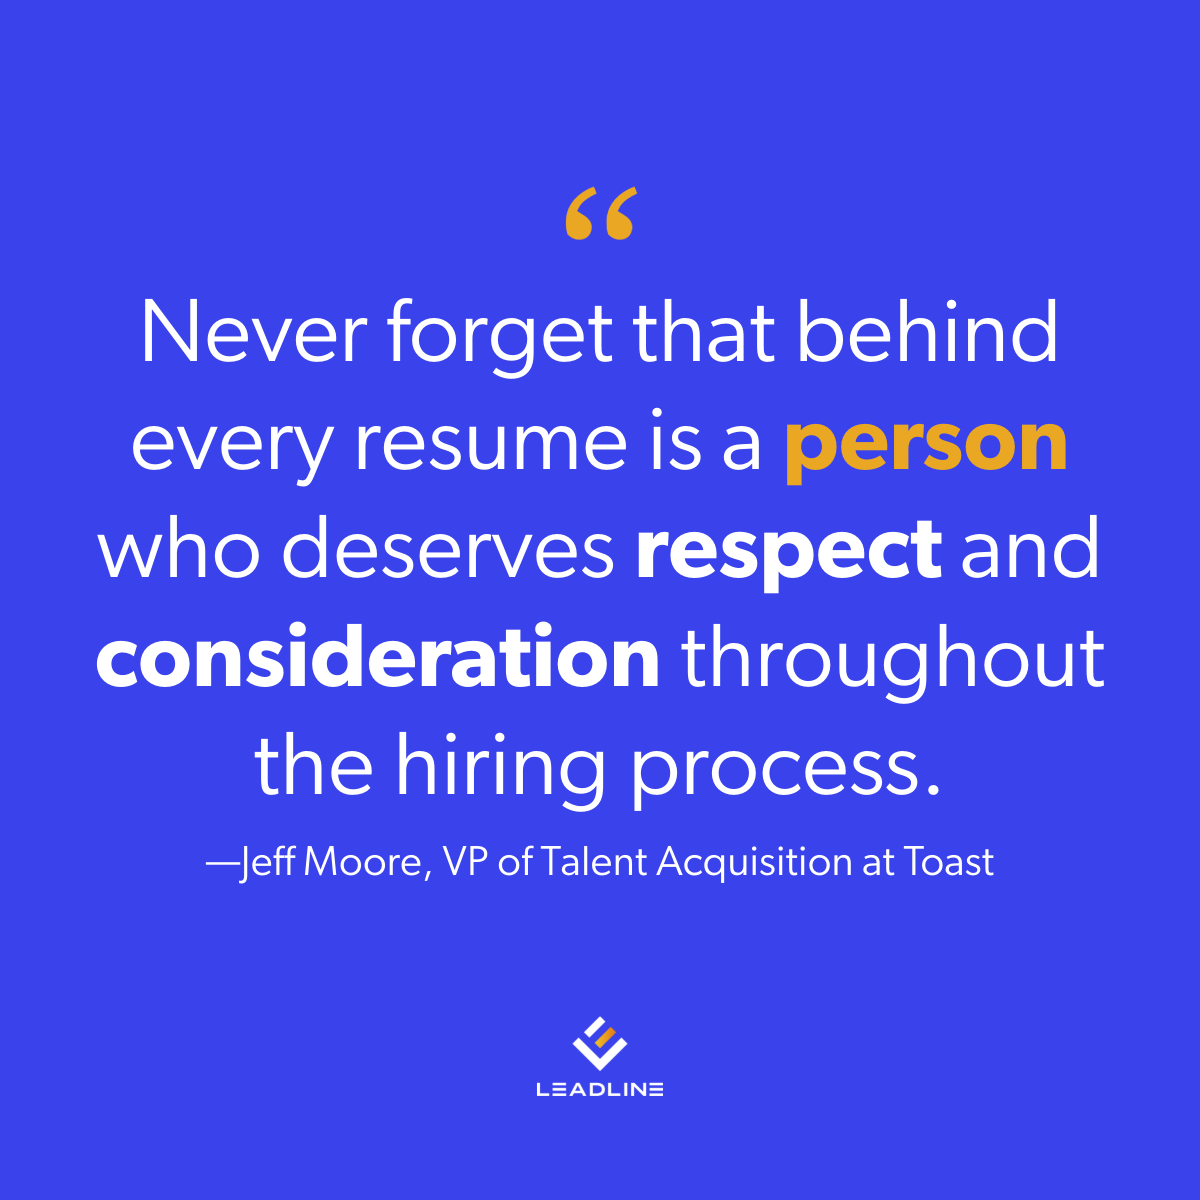 In the rush to fill a position, it's easy to forget the human element. Let's treat all candidates with dignity and respect throughout the hiring process, from the initial application to the final decision.💪

#TalentAcquisition #FutureOfWork #DEI #InclusiveHiring #HiringTips